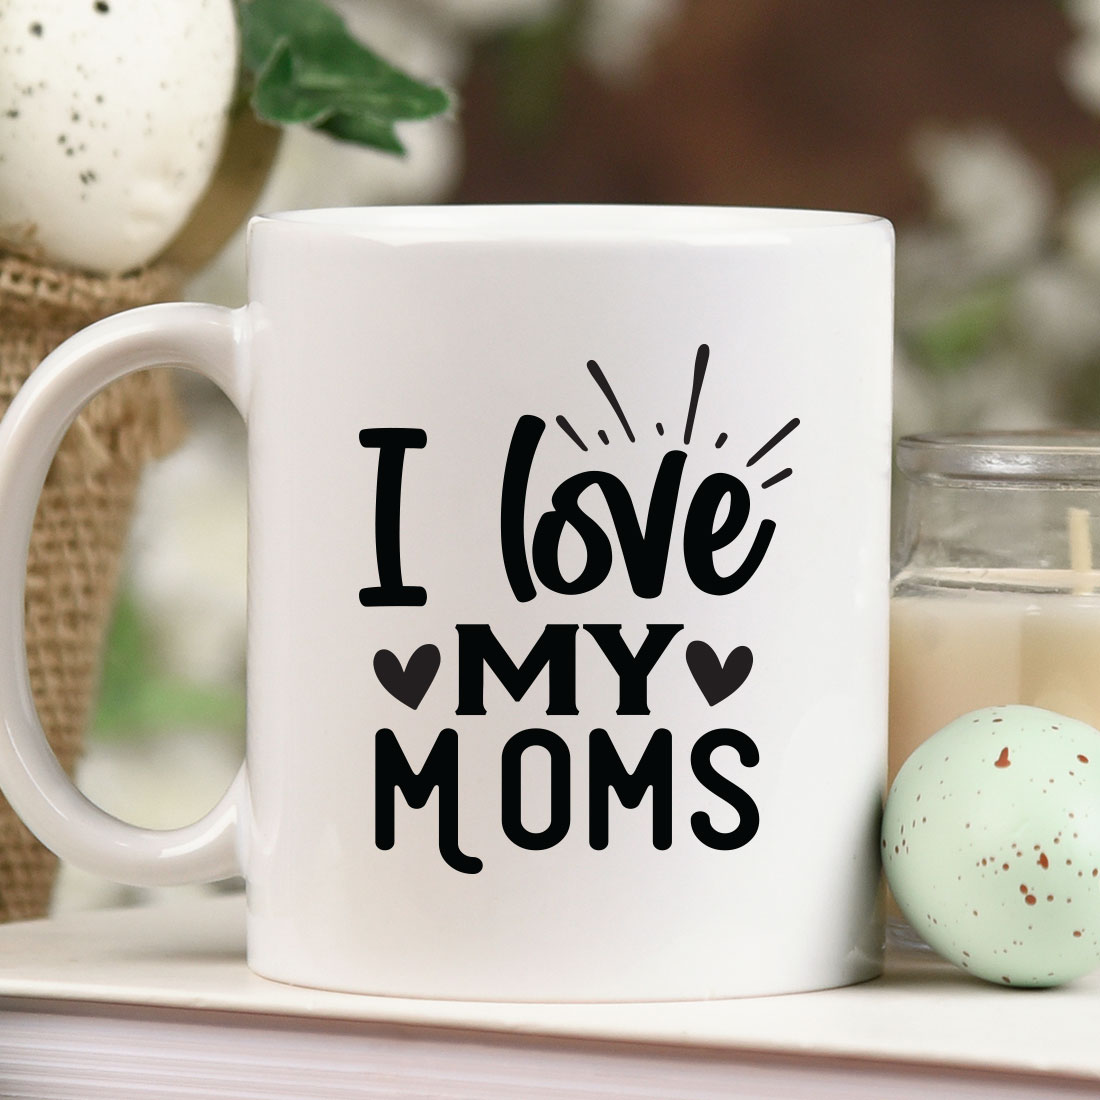 Coffee mug that says i love my moms next to a candle.